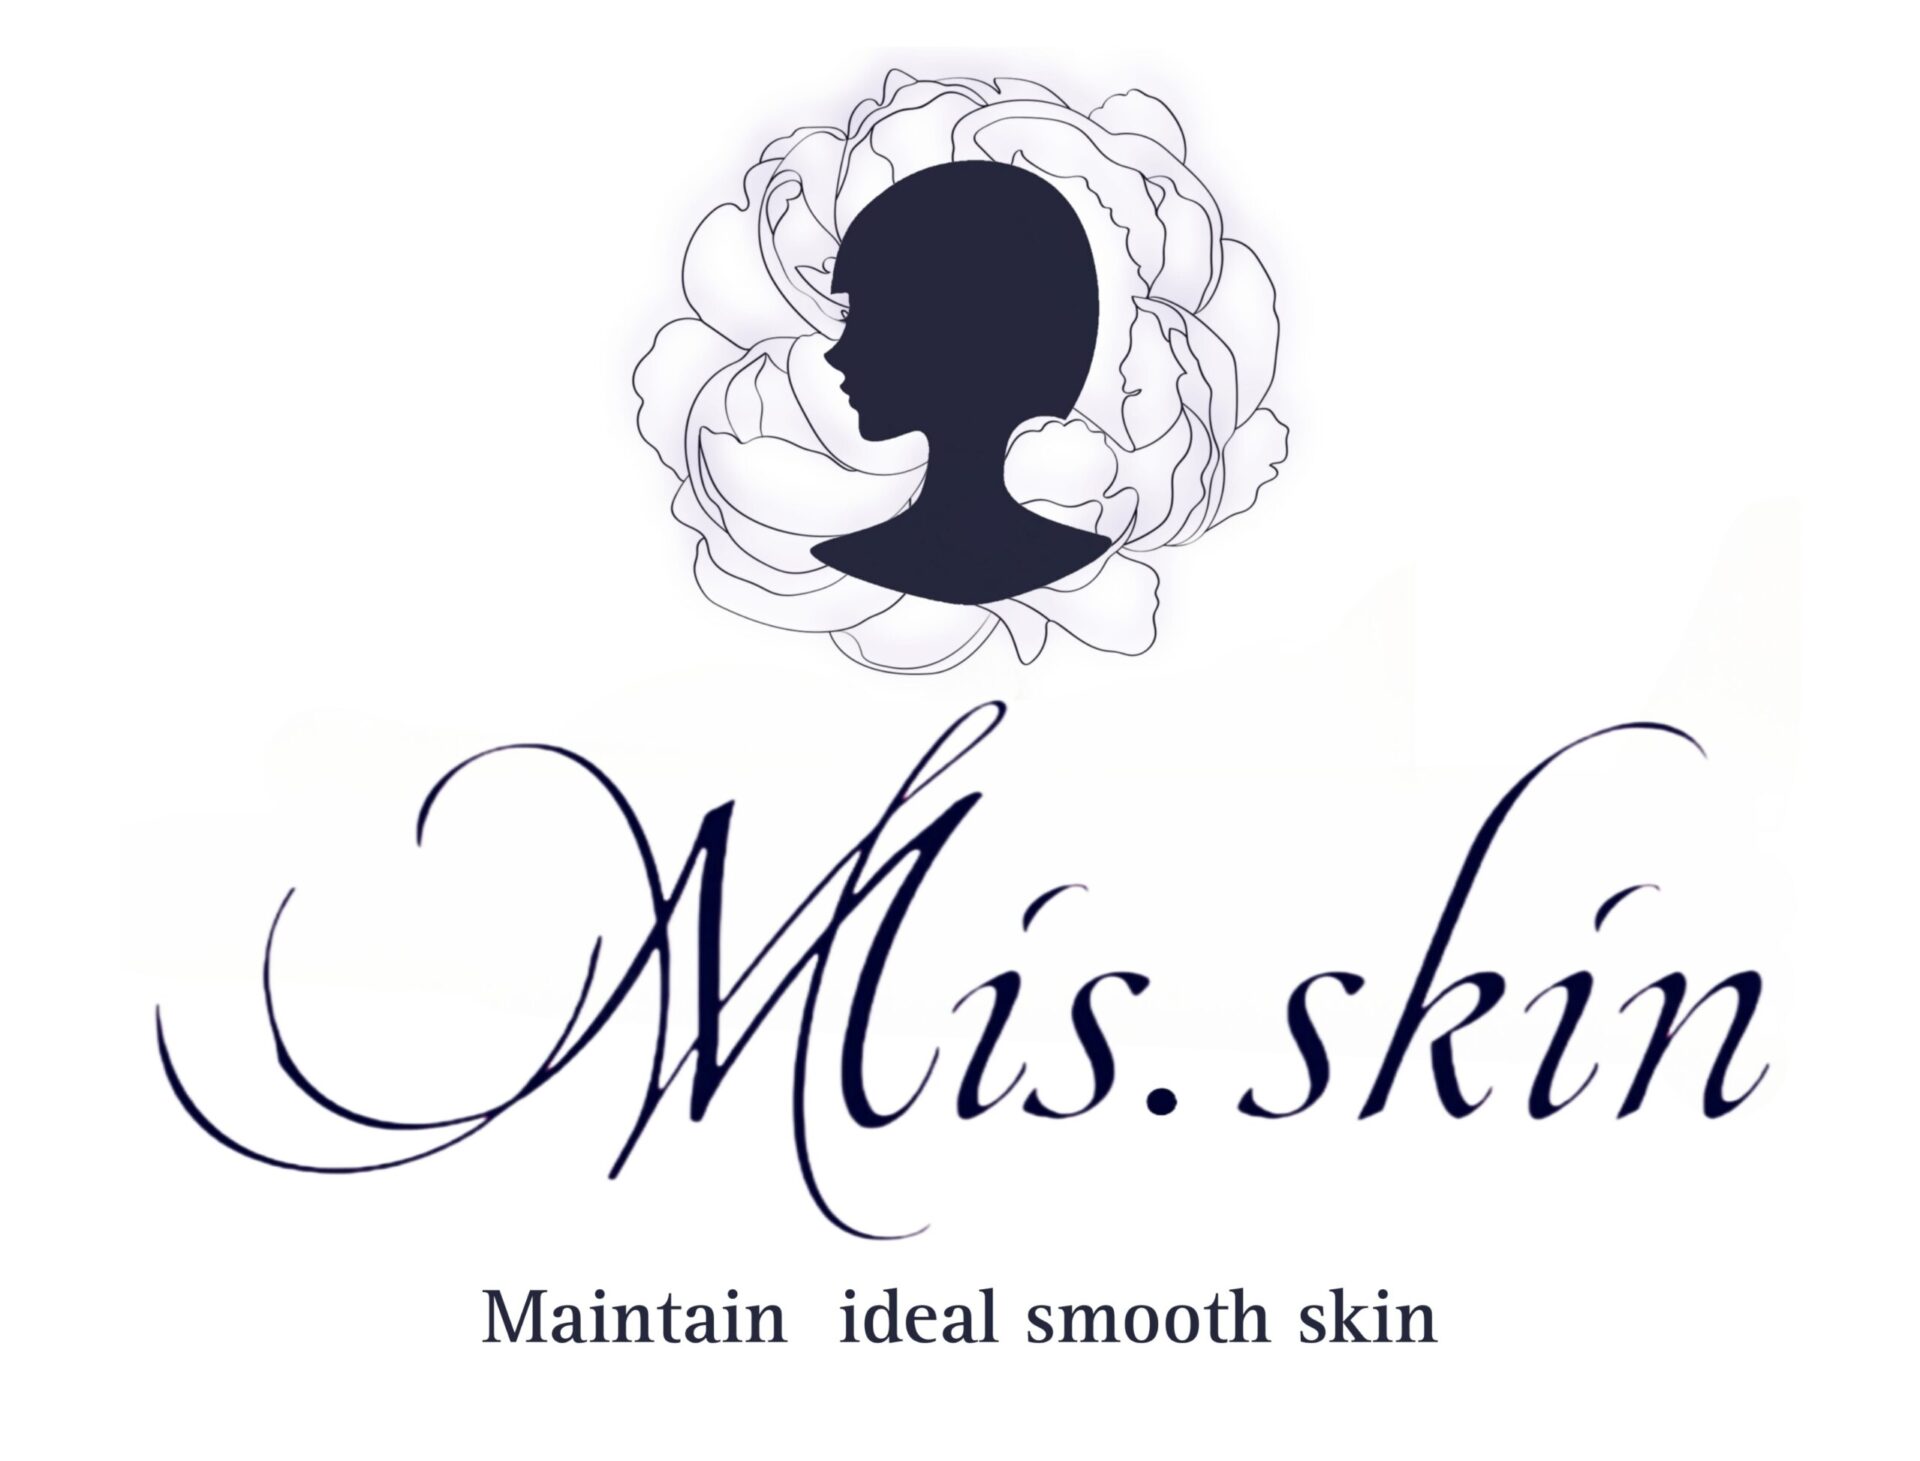 Welcome to Mis.skin